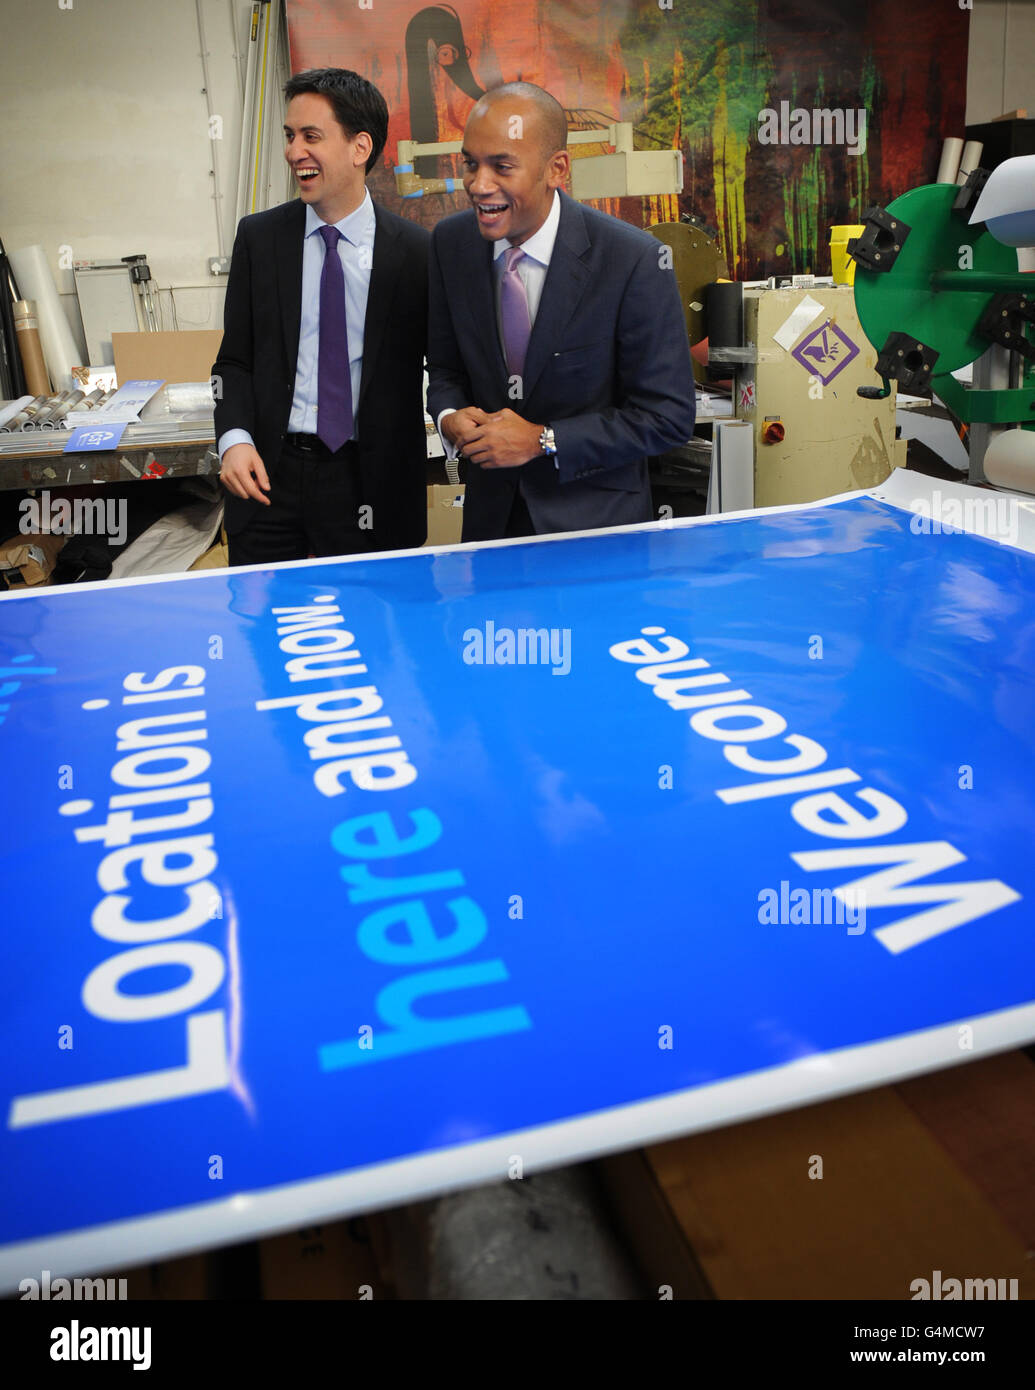 Labour leader Ed Miliband and shadow Business, Innovation and Skills Secretary Chuka Umunna visit Colourset Printers in Bermondsey south east London today where they discussed the current economic situation. Stock Photo